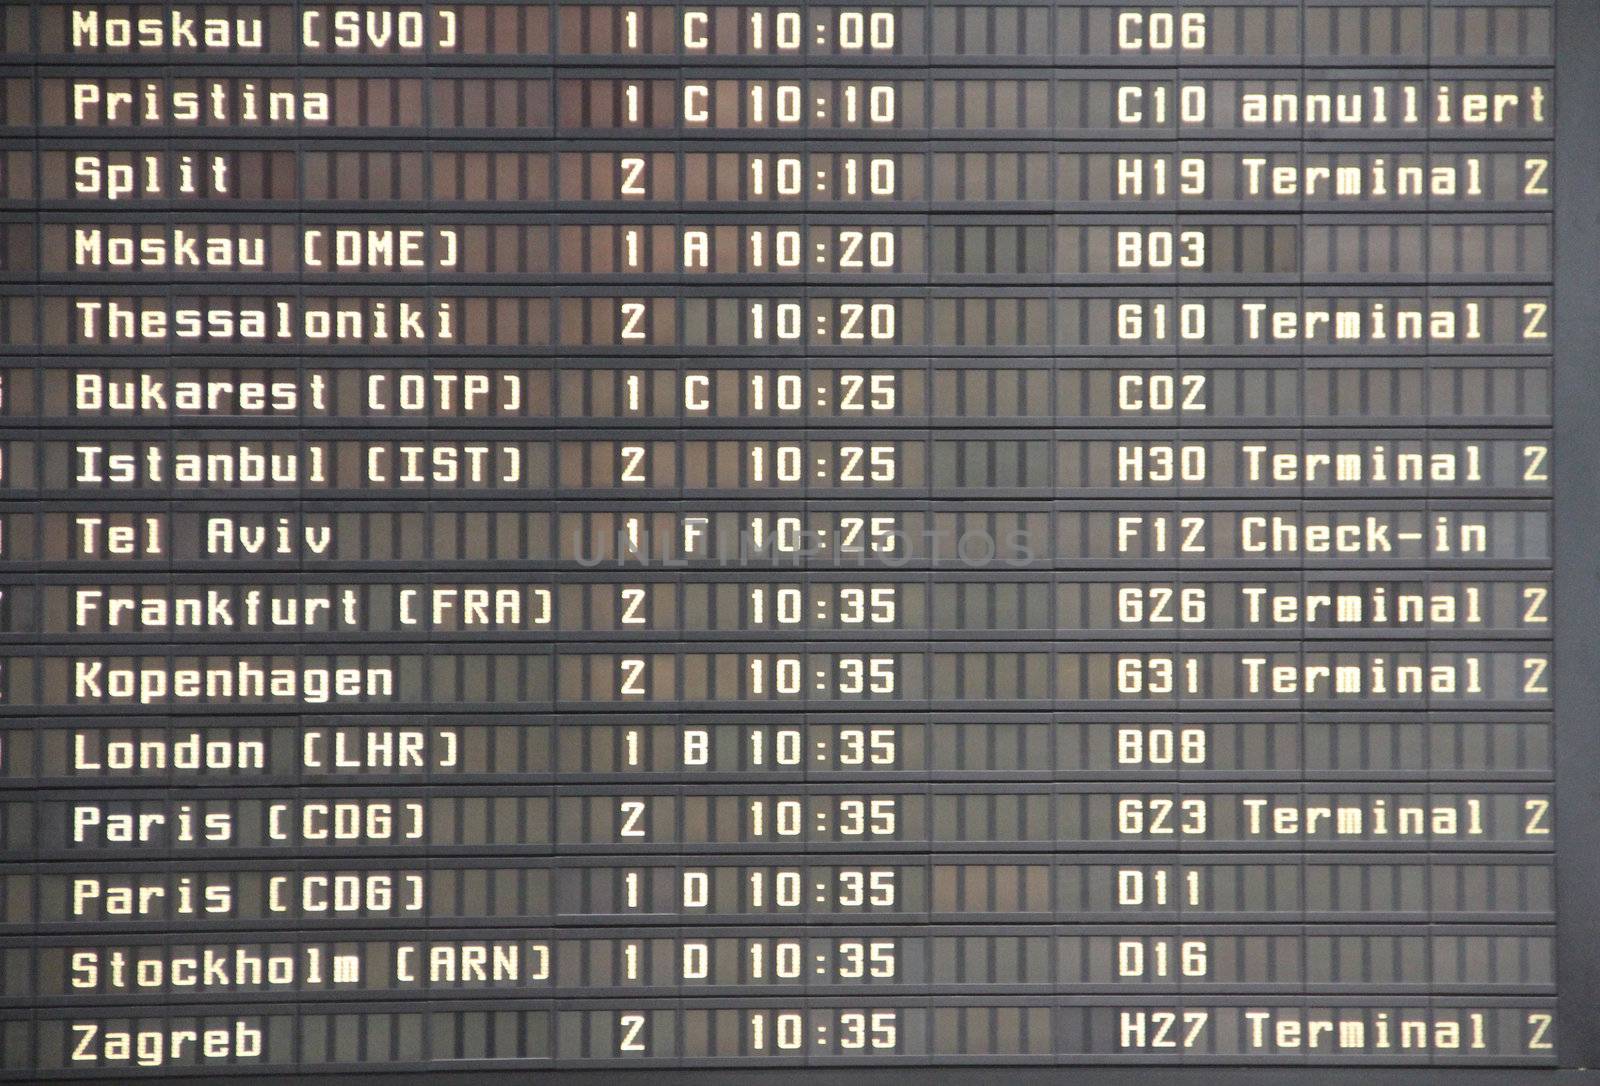 flight board with timetable of arrived planes